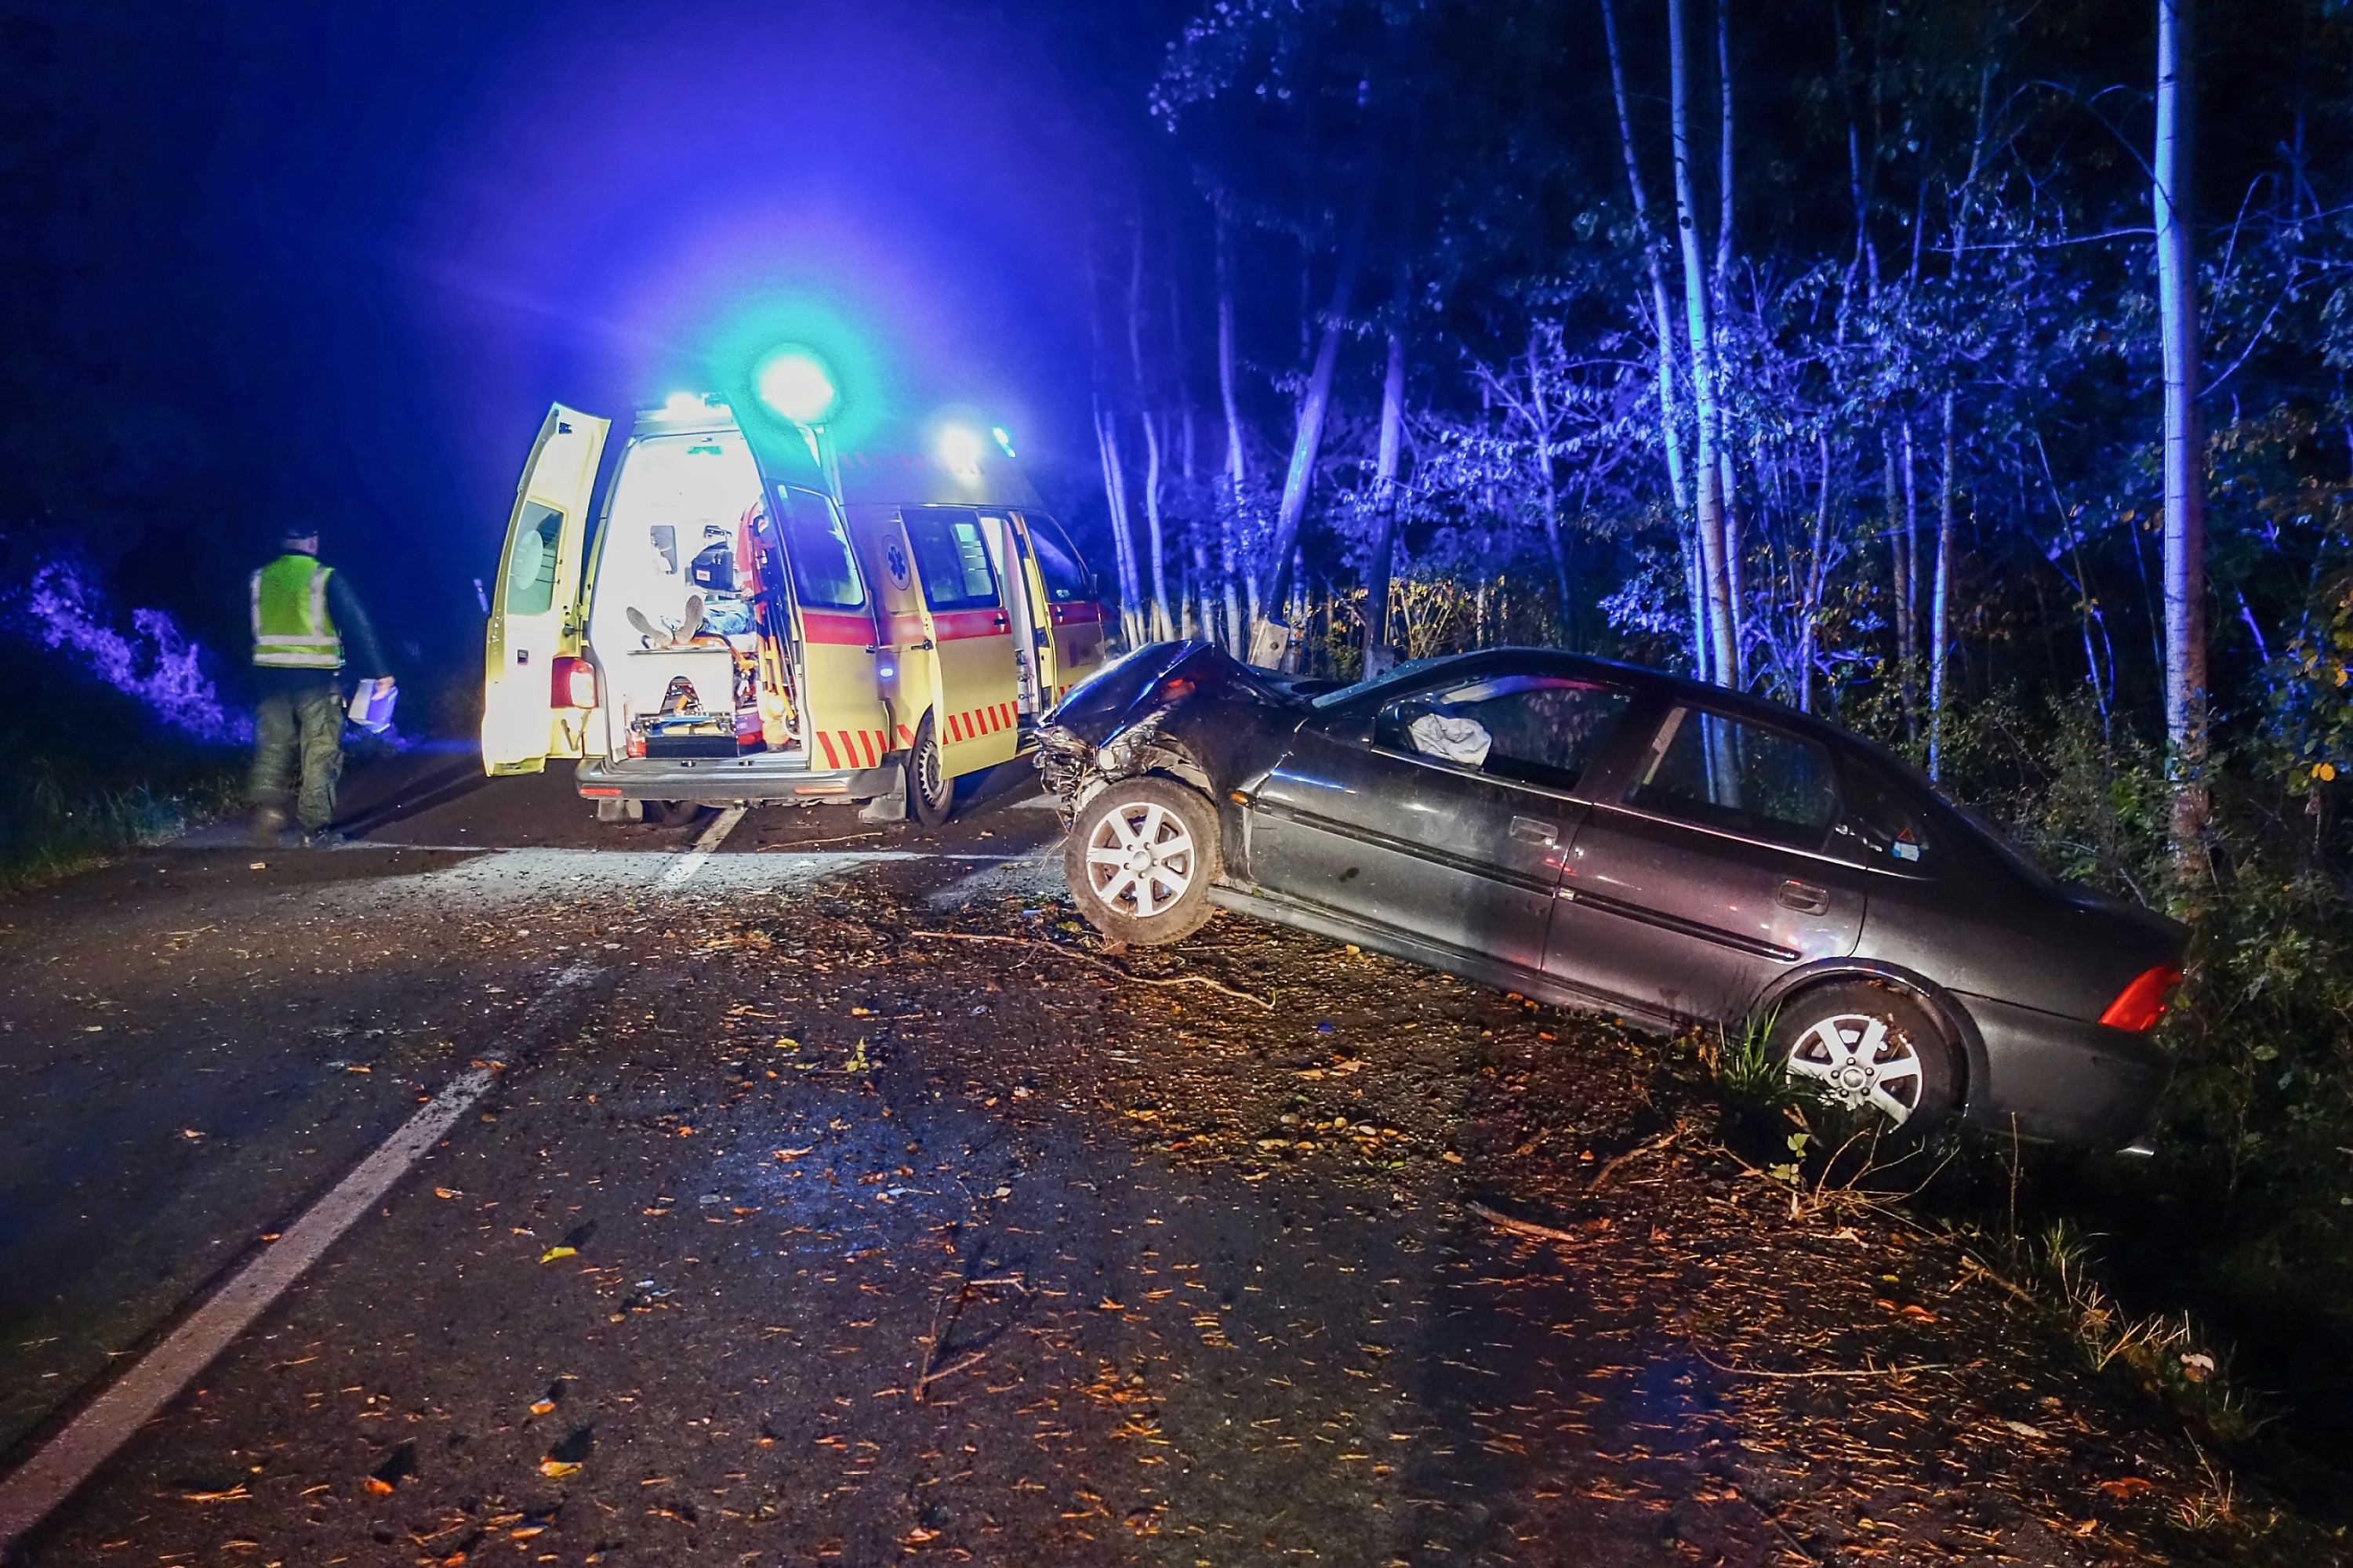 Car accident. The car crashed at night on a wet road. | Source: Shutterstock